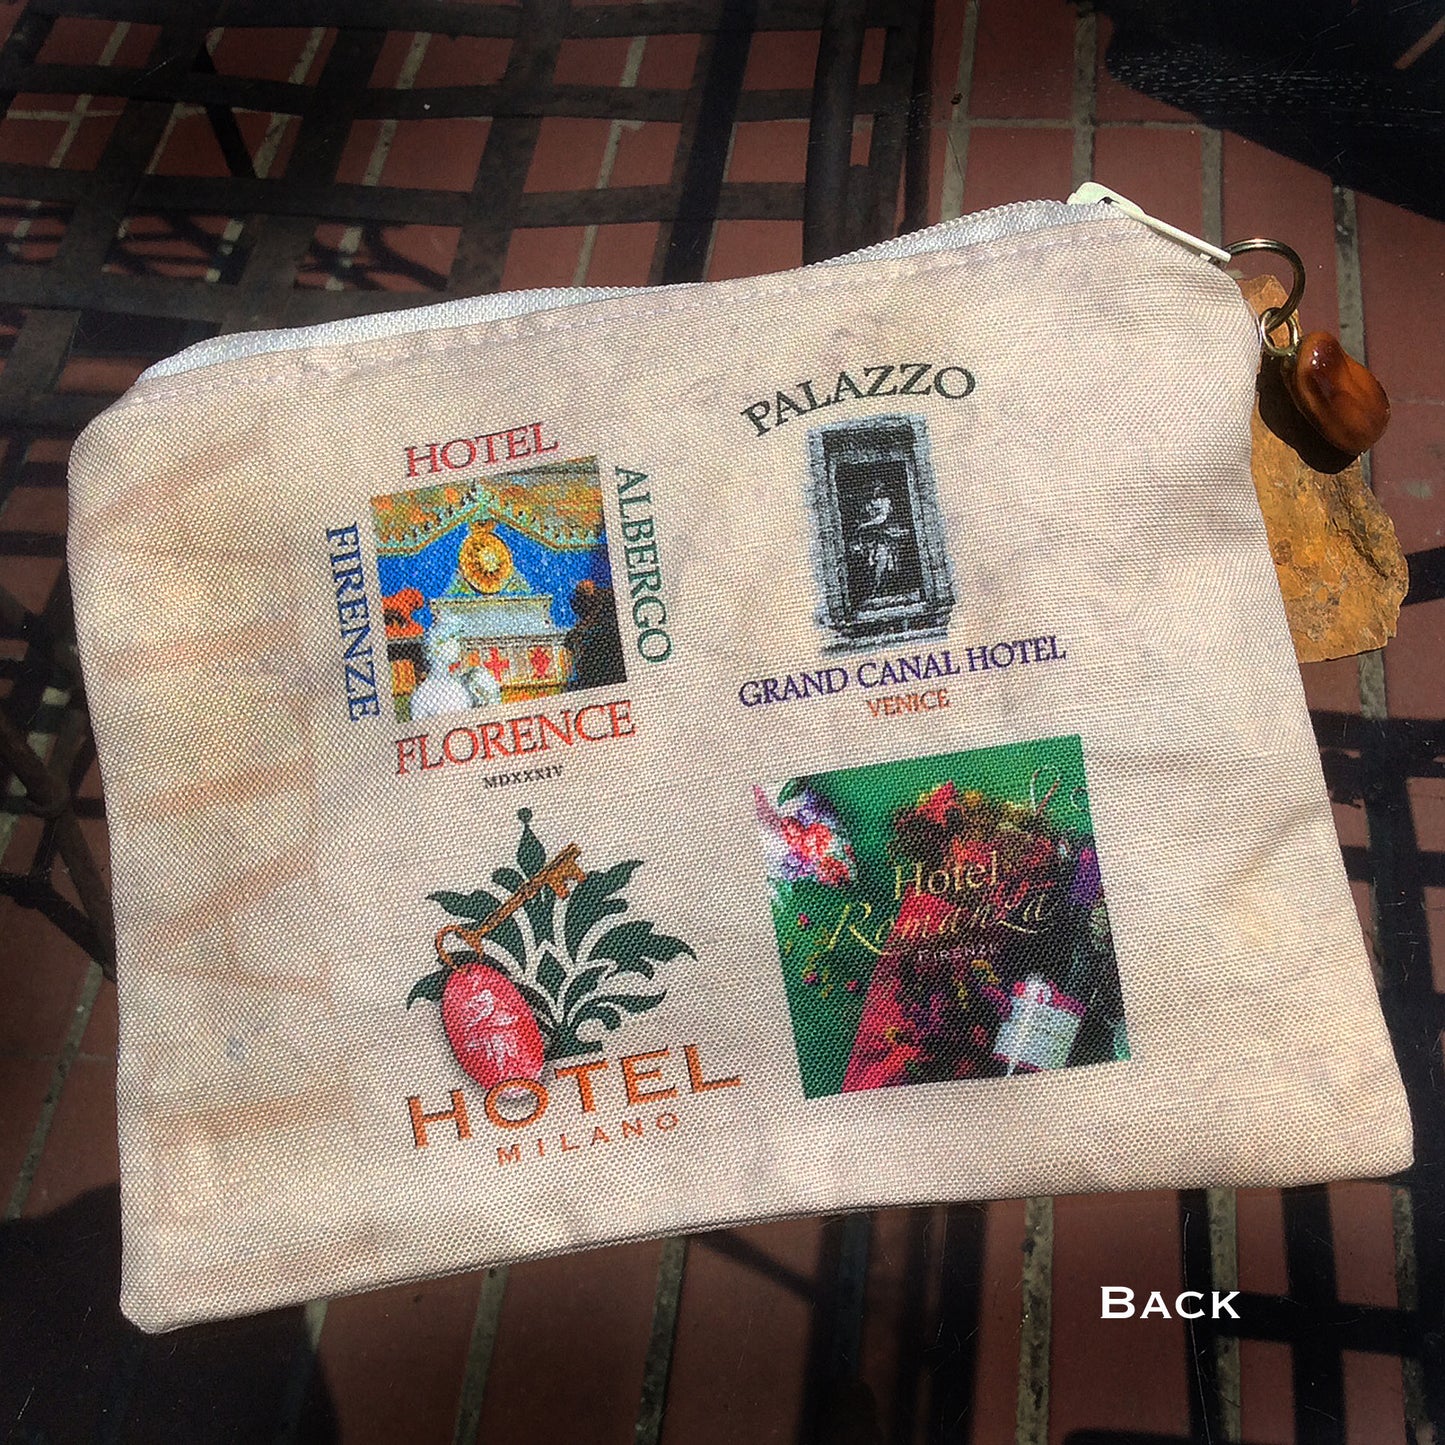 Italia Coffee Labels and Hotels Travel Bag